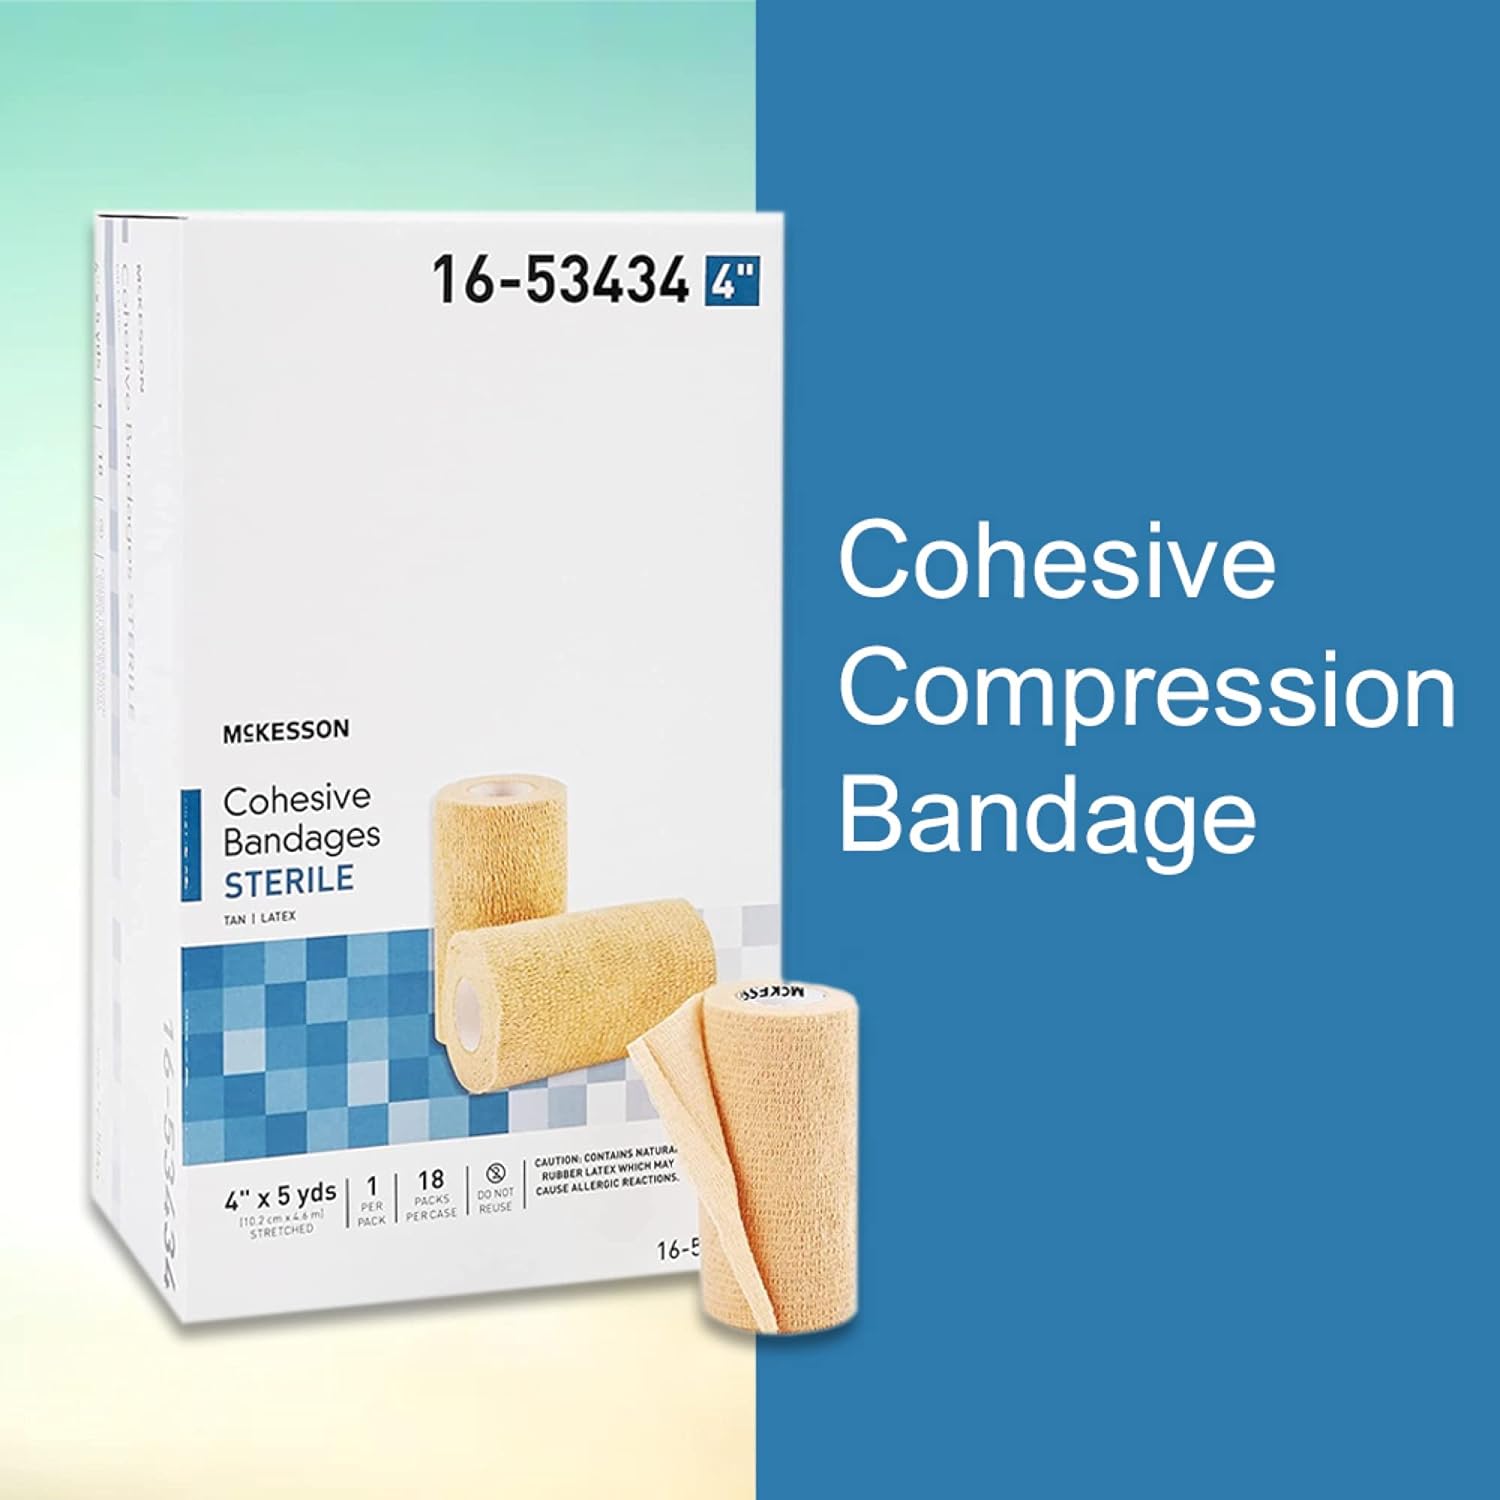 McKesson Cohesive Bandage, Sterile, Self-Adherent Closure, Tan, 4 in x 5 yds, 1 Count, 1 Roll